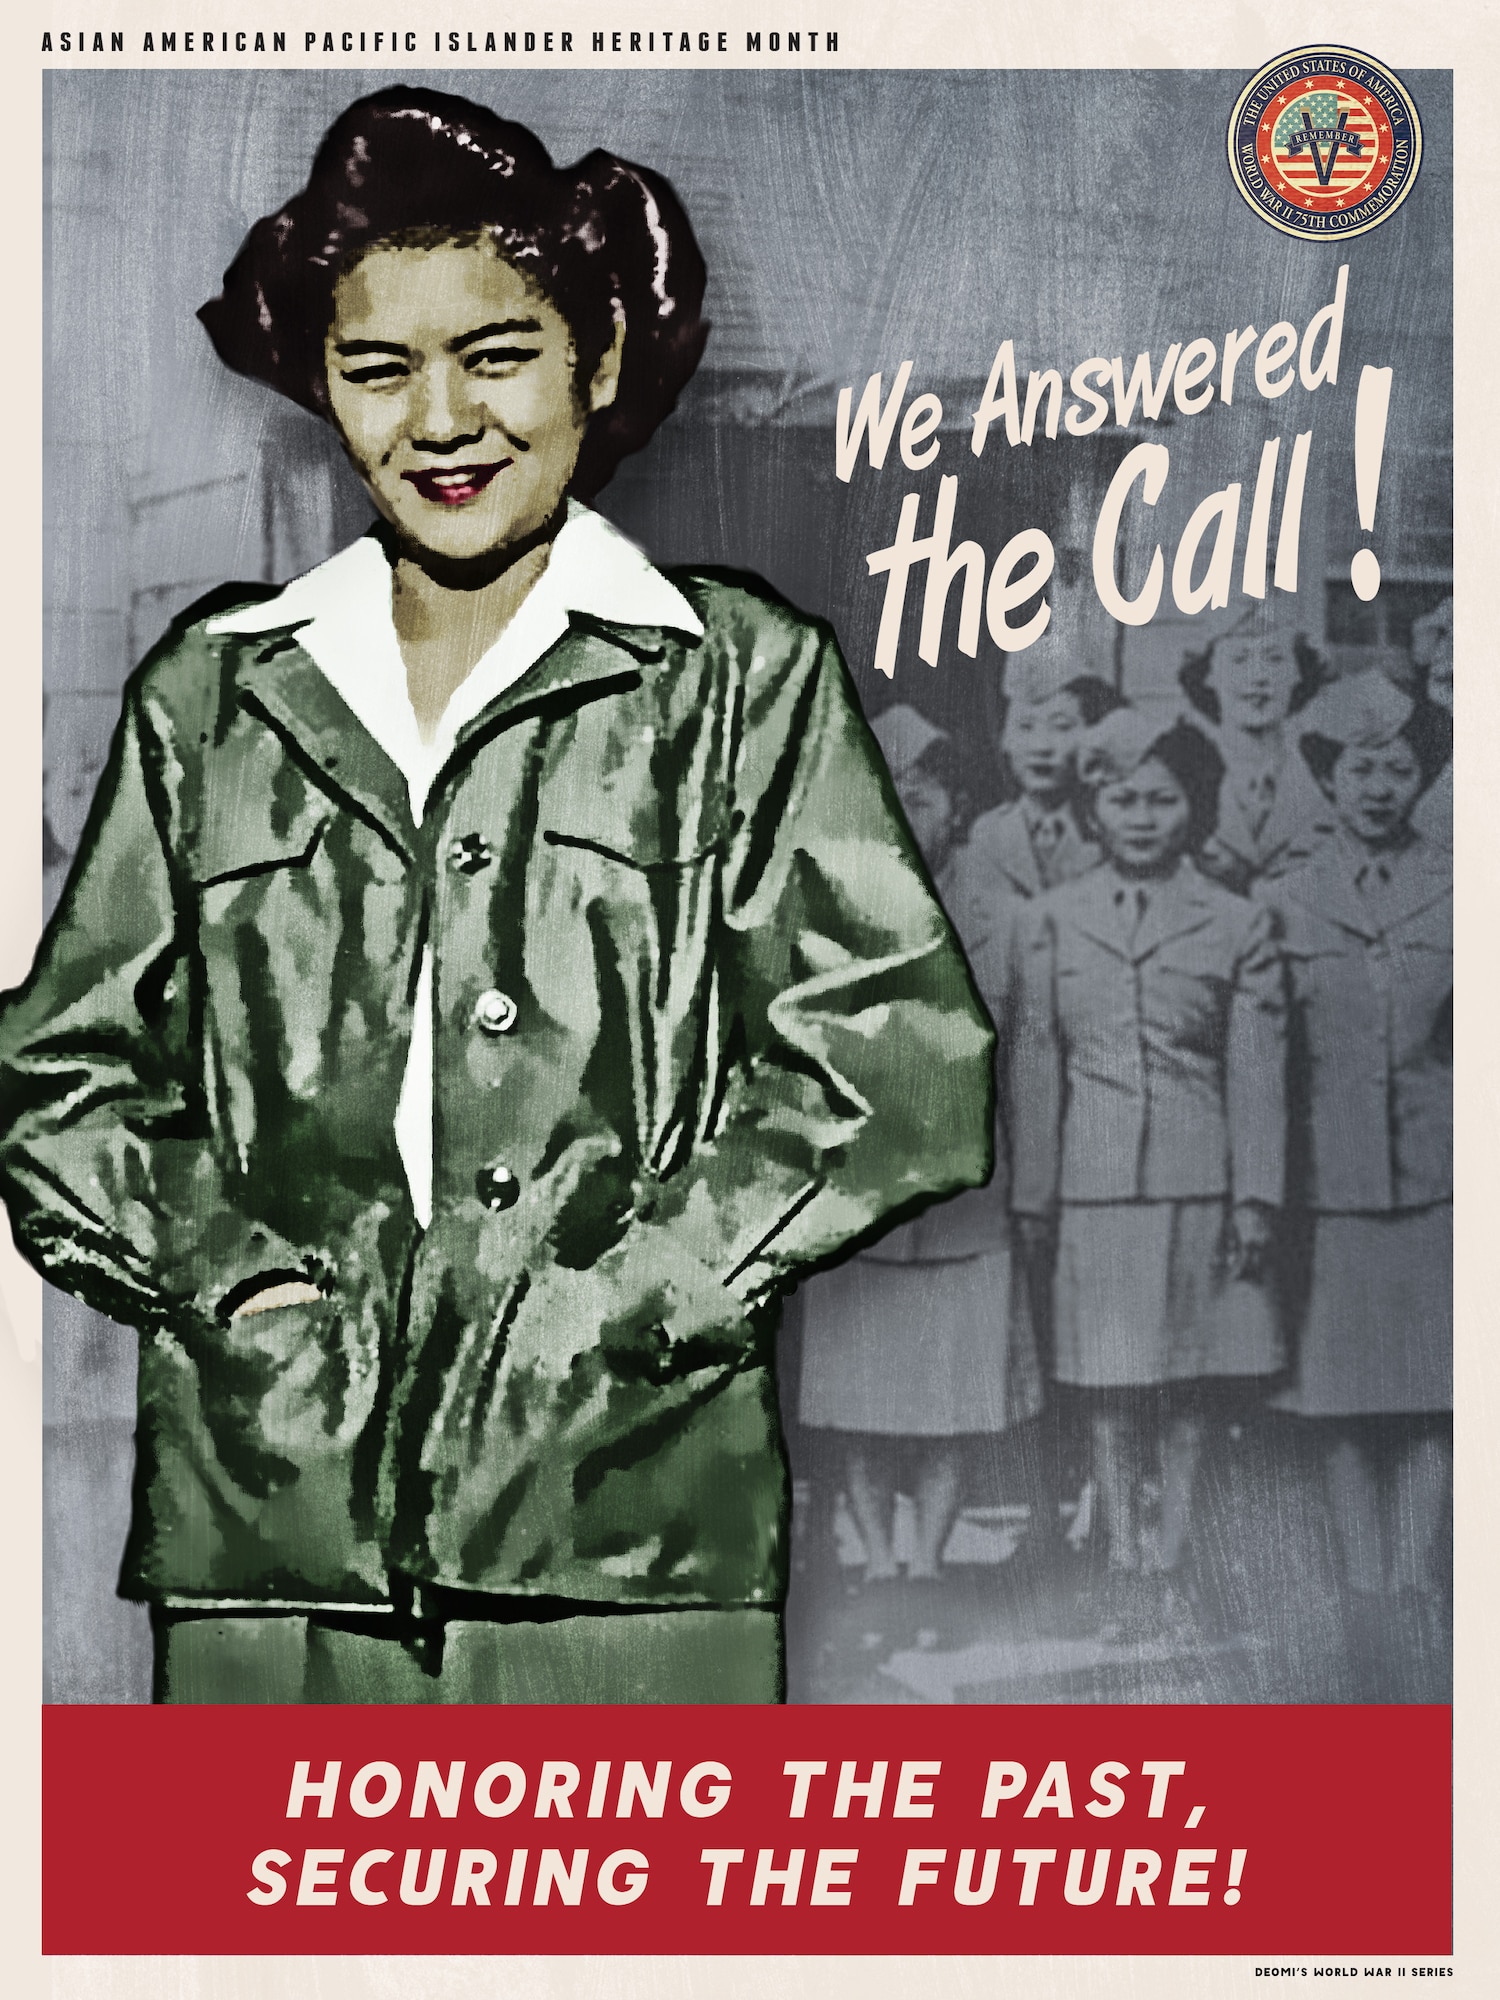 The Department of Defense Asian American Pacific Islander Heritage Month posters are part of a series commemorating the 75th Anniversary of World War II. Each commemoration poster set highlights the significant contributions of special observance groups towards achieving total victory in this watershed event. Each poster is reminiscent of the colors and styles found in the 1940’s Recruitment and Victory posters from the World War II era.